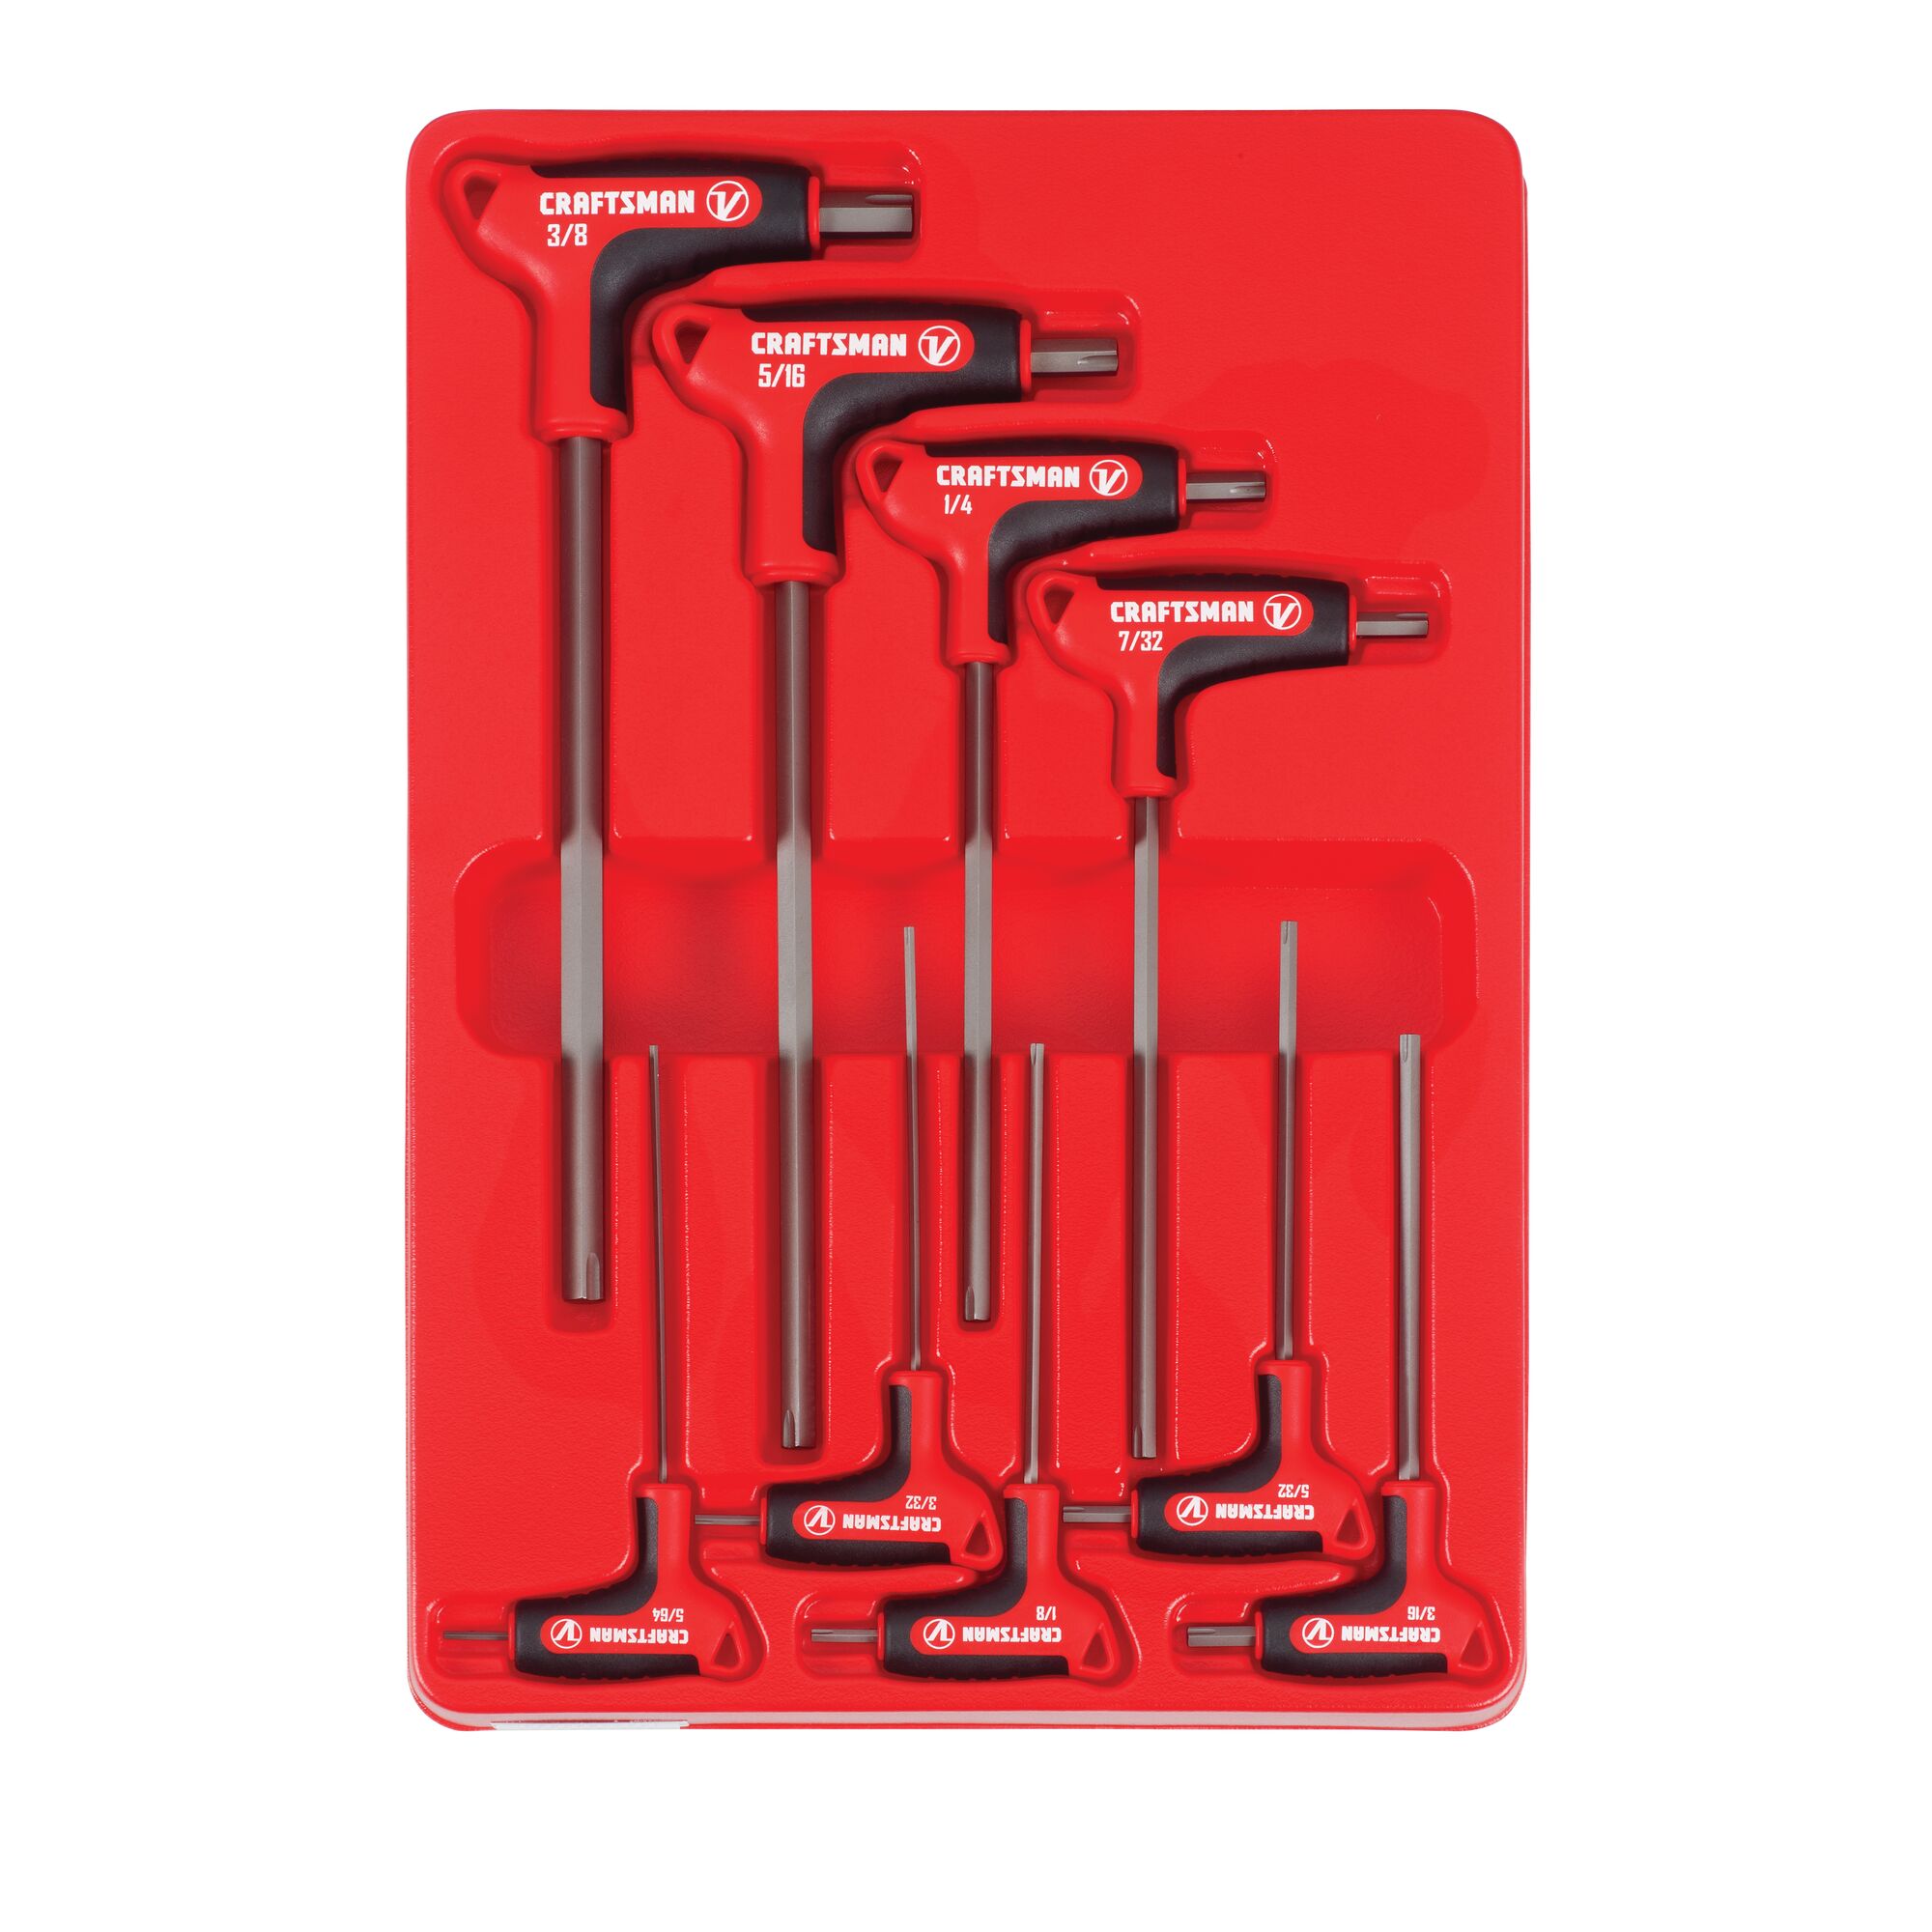 V series 9 piece x tract technologytm s a e t handle set in plastic packaging.